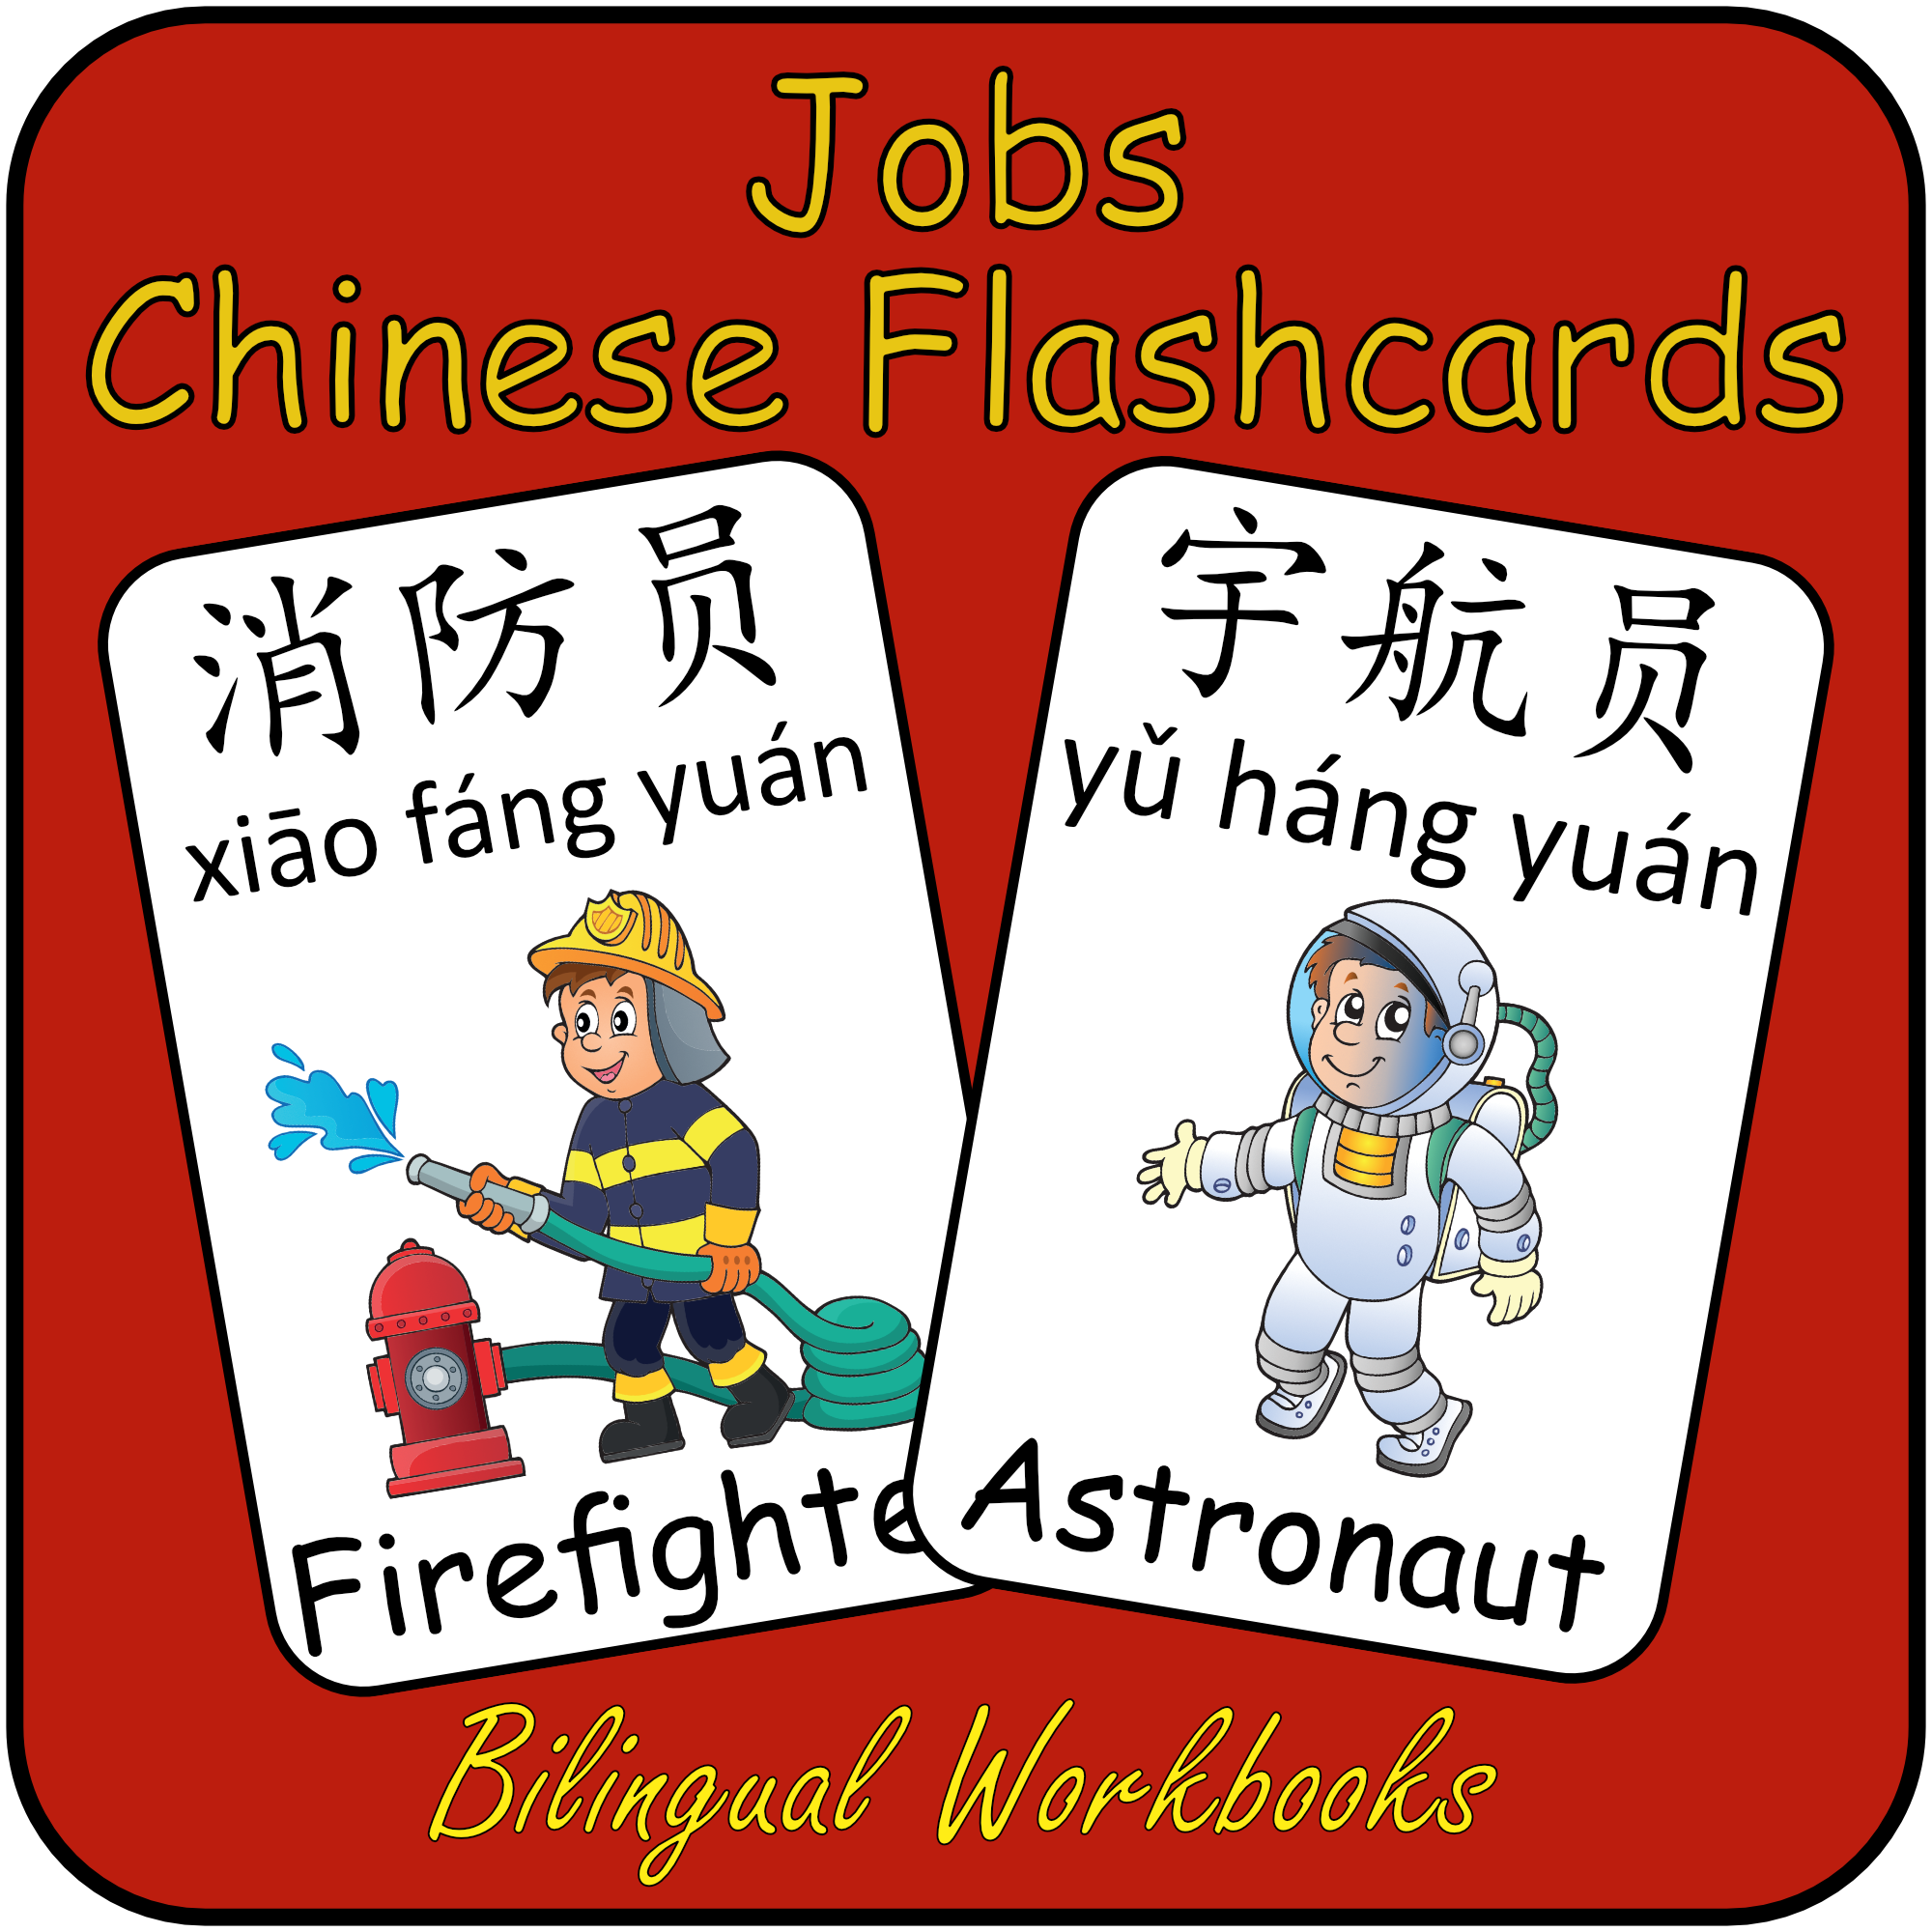 Mandarin Chinese First Words Flashcards - Jobs flash cards with English name, Simplified Chinese Character and Pinyin